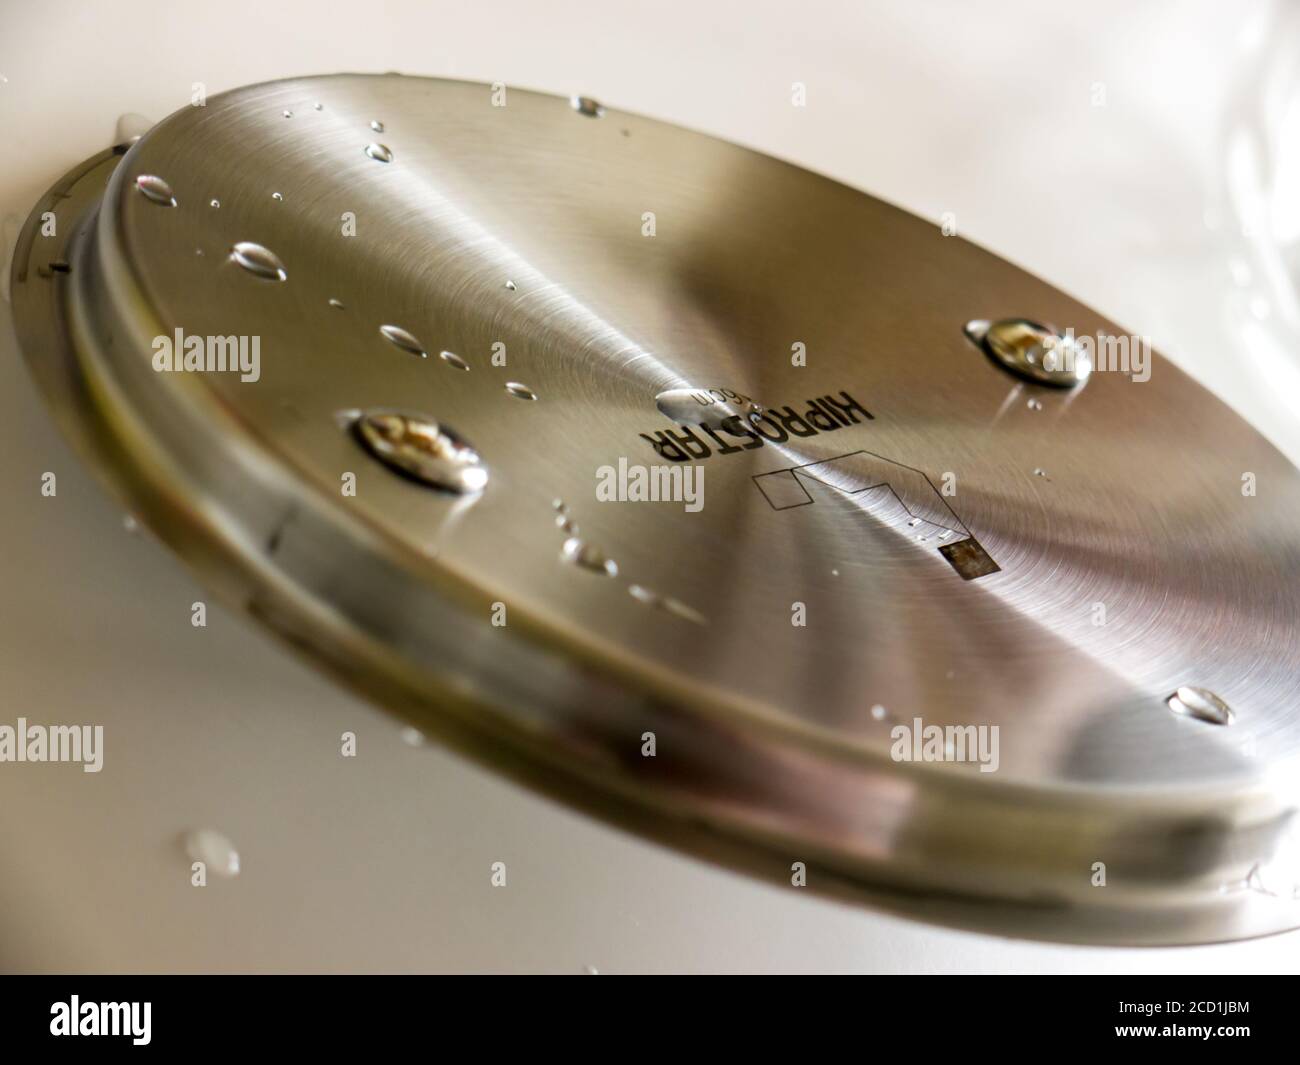 GOMEL, BELARUS - AUGUST 25, 2020: The Kiprostar metal pan. Kiprostar is a Japanese company that manufactures commercial cooking equipment. Stock Photo